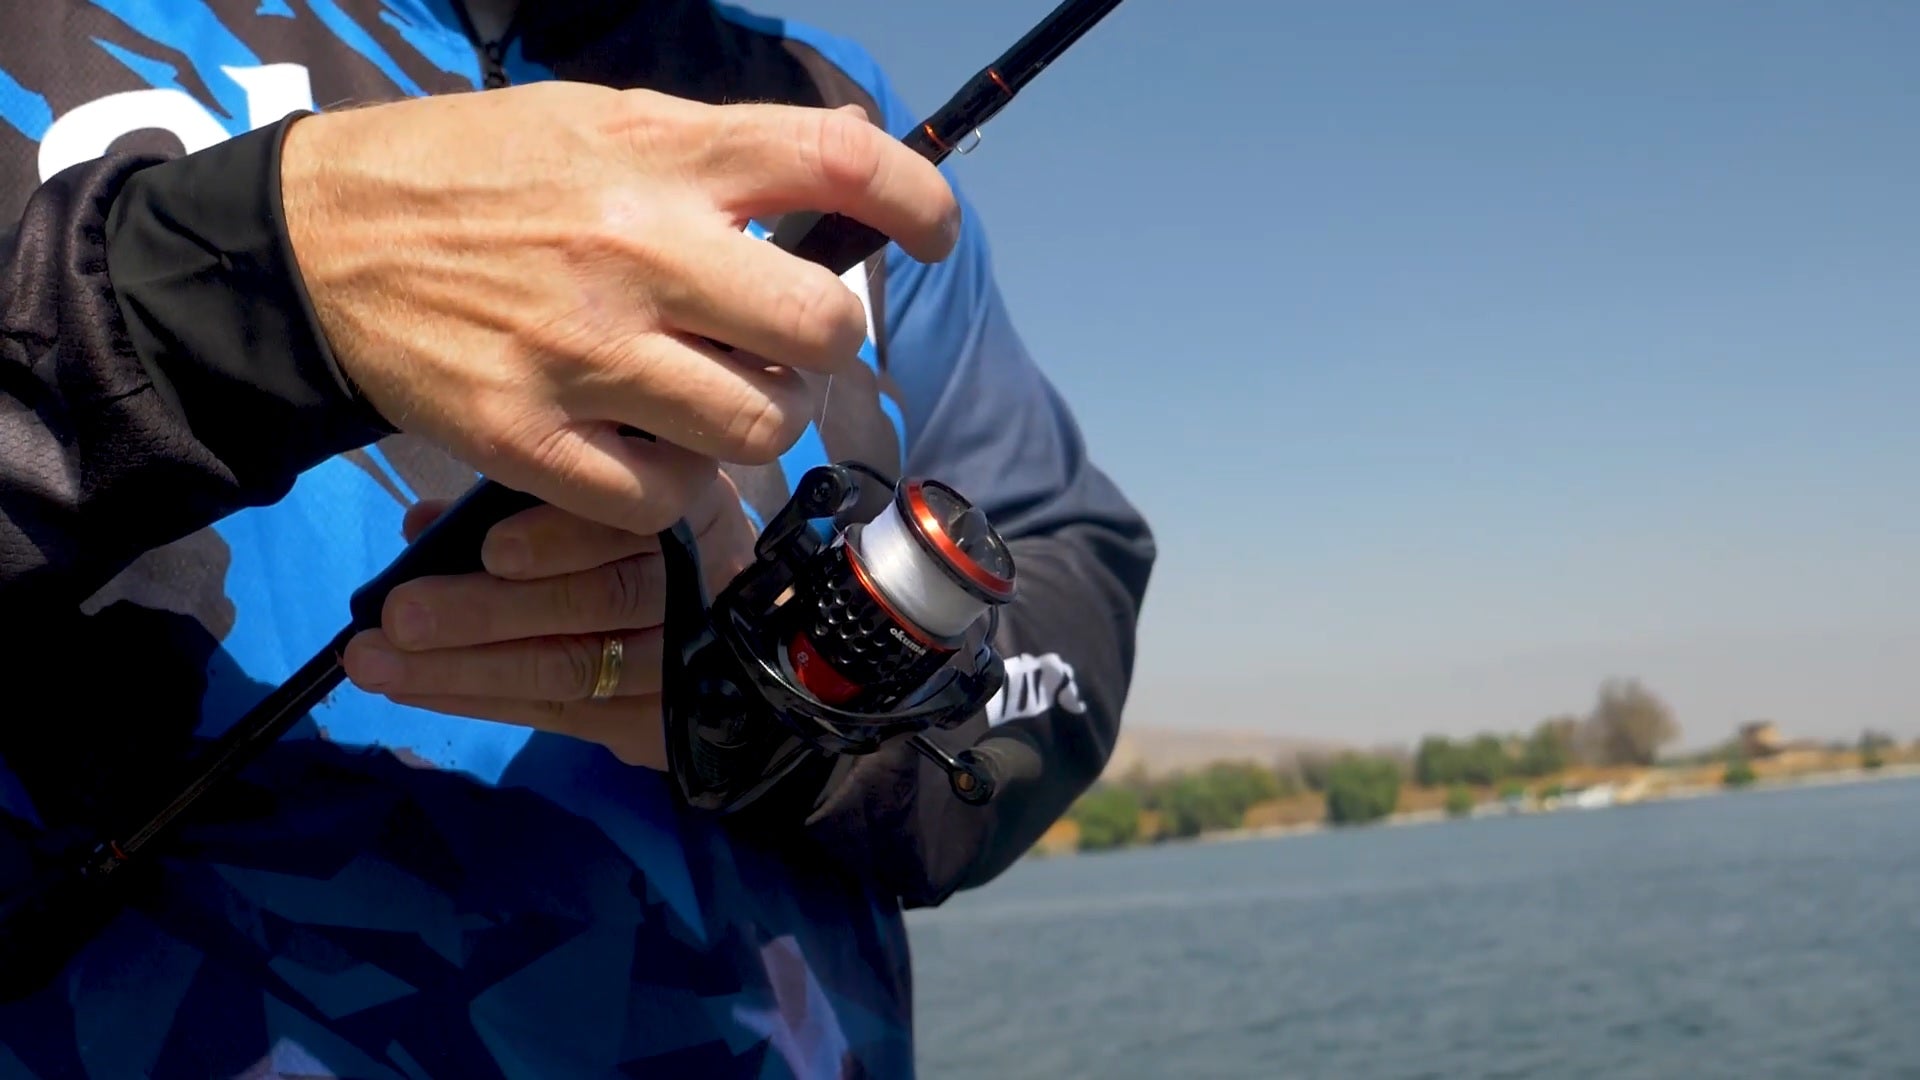 Tune-Up Tuesday: How to Cast with a Spinning Reel